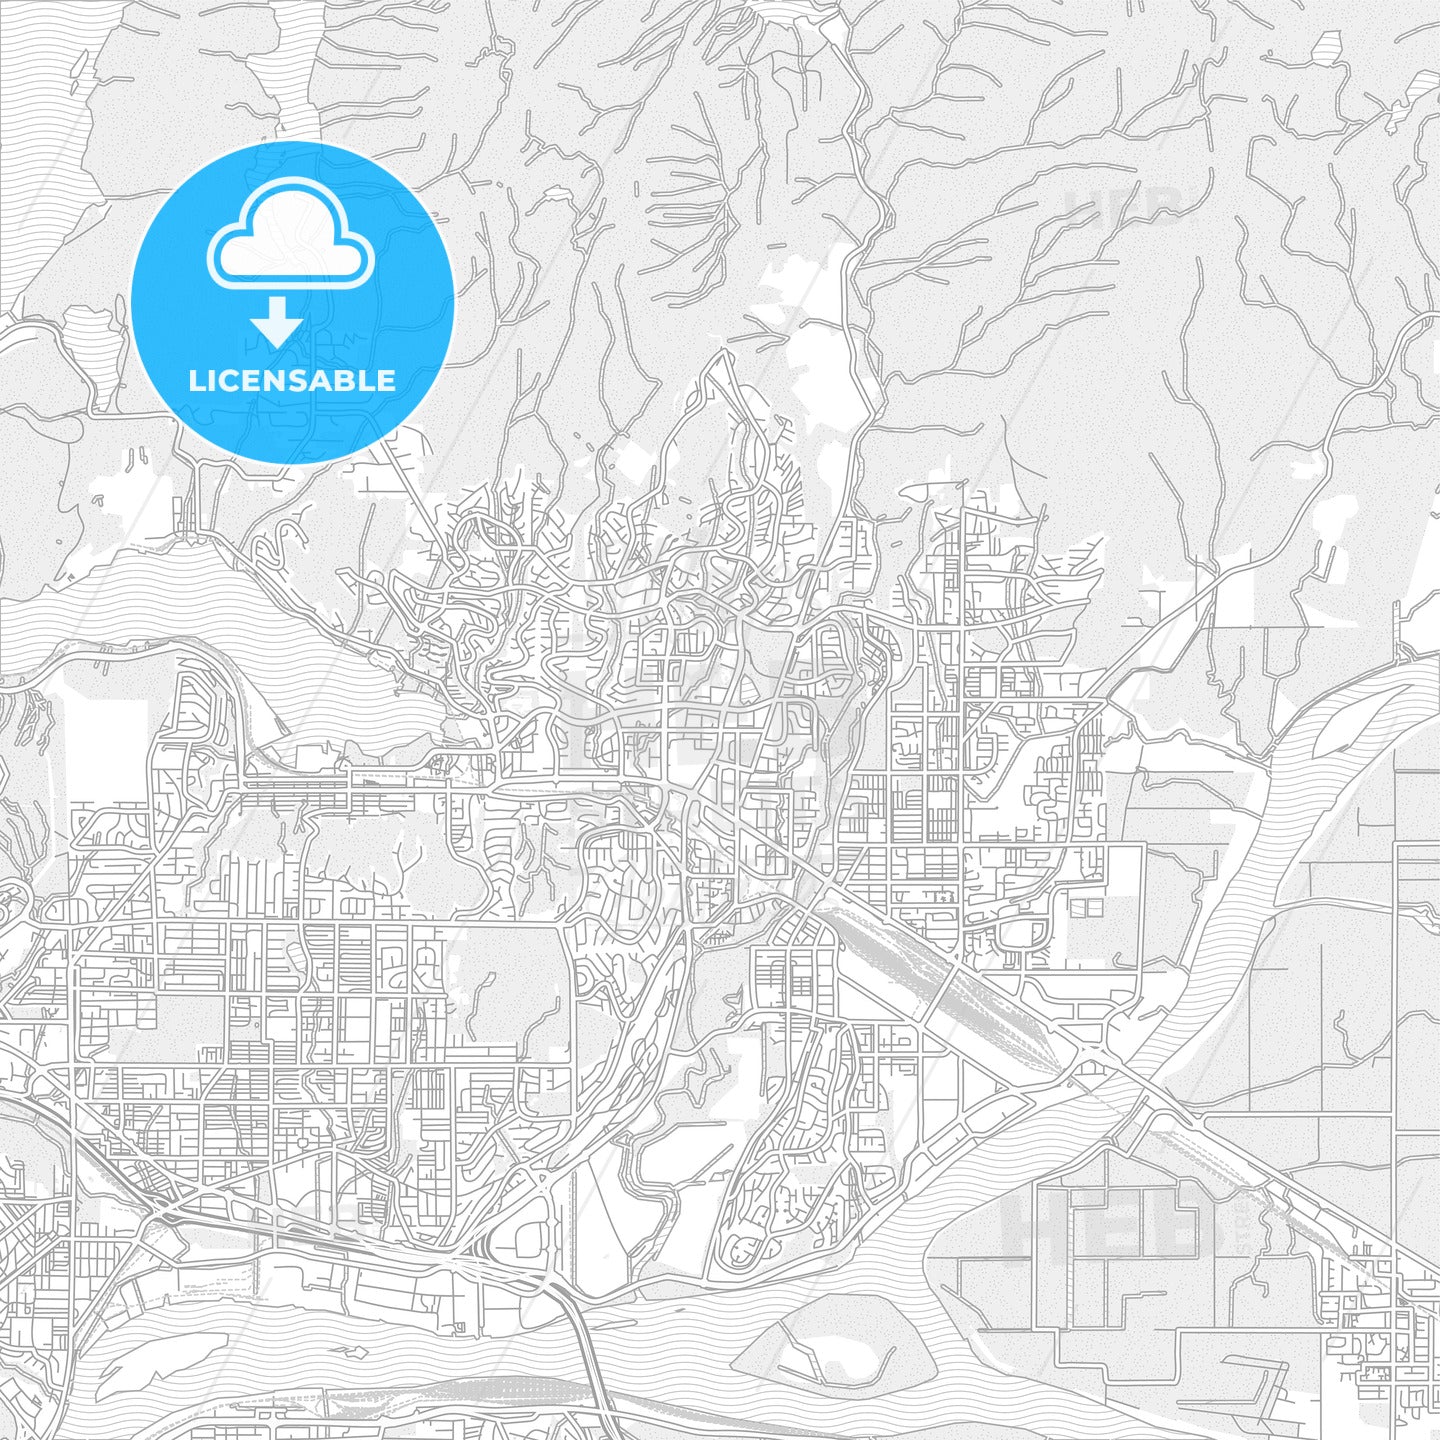 Coquitlam, British Columbia, Canada, bright outlined vector map